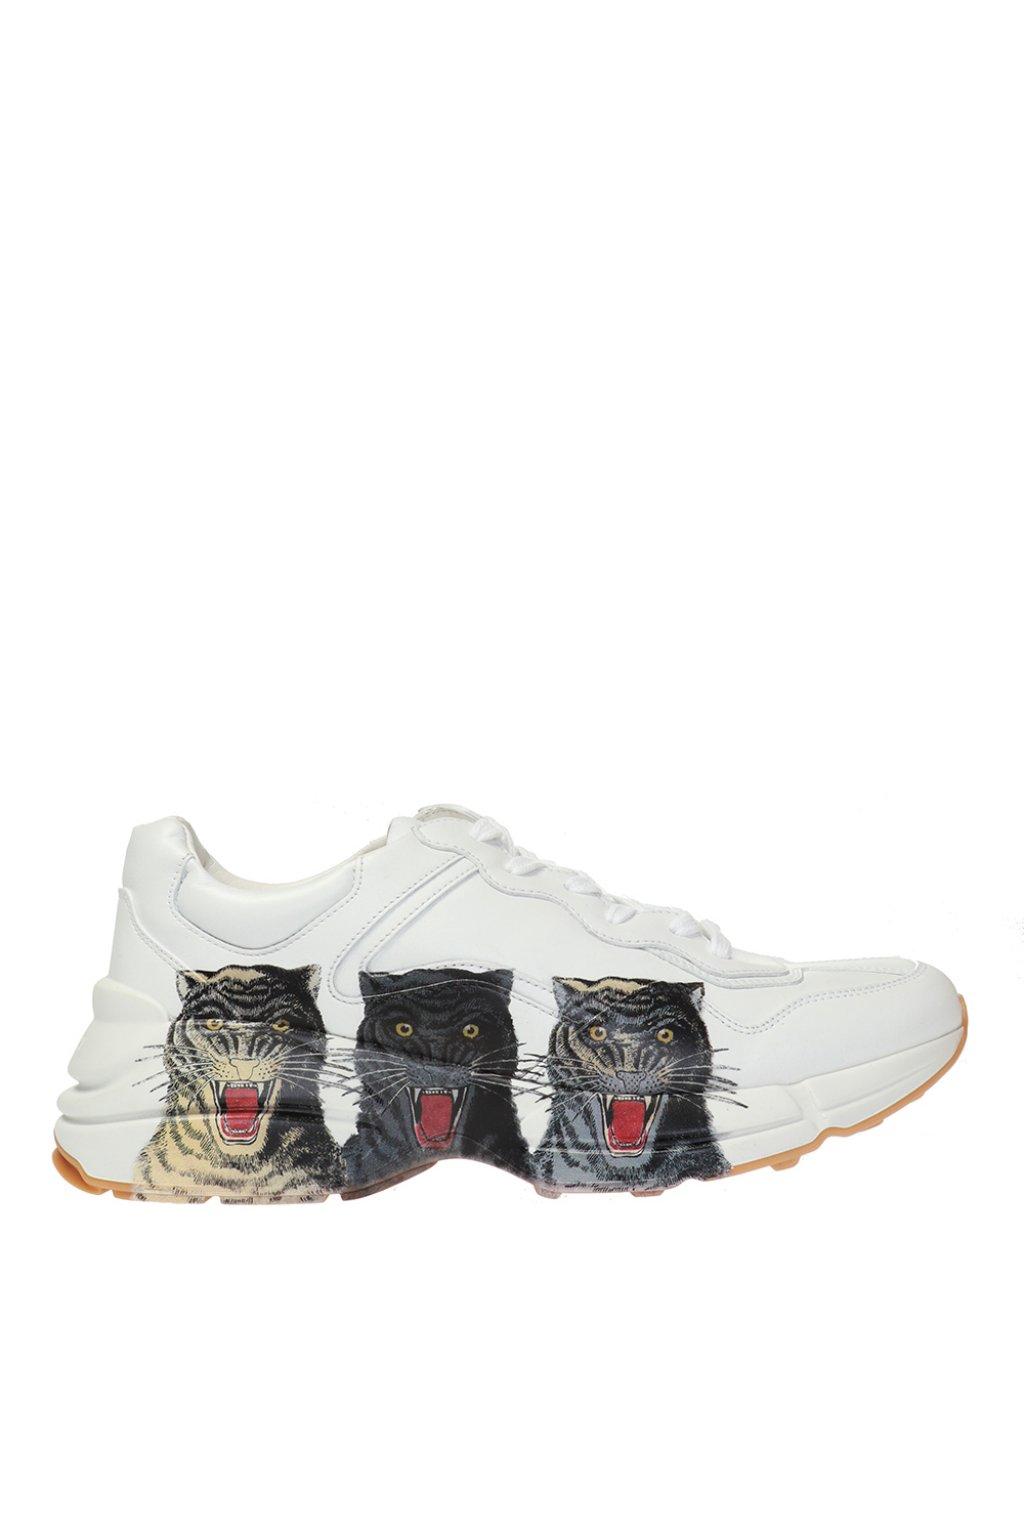 Gucci White Rhyton Sneakers for Men - Save 2% - Lyst